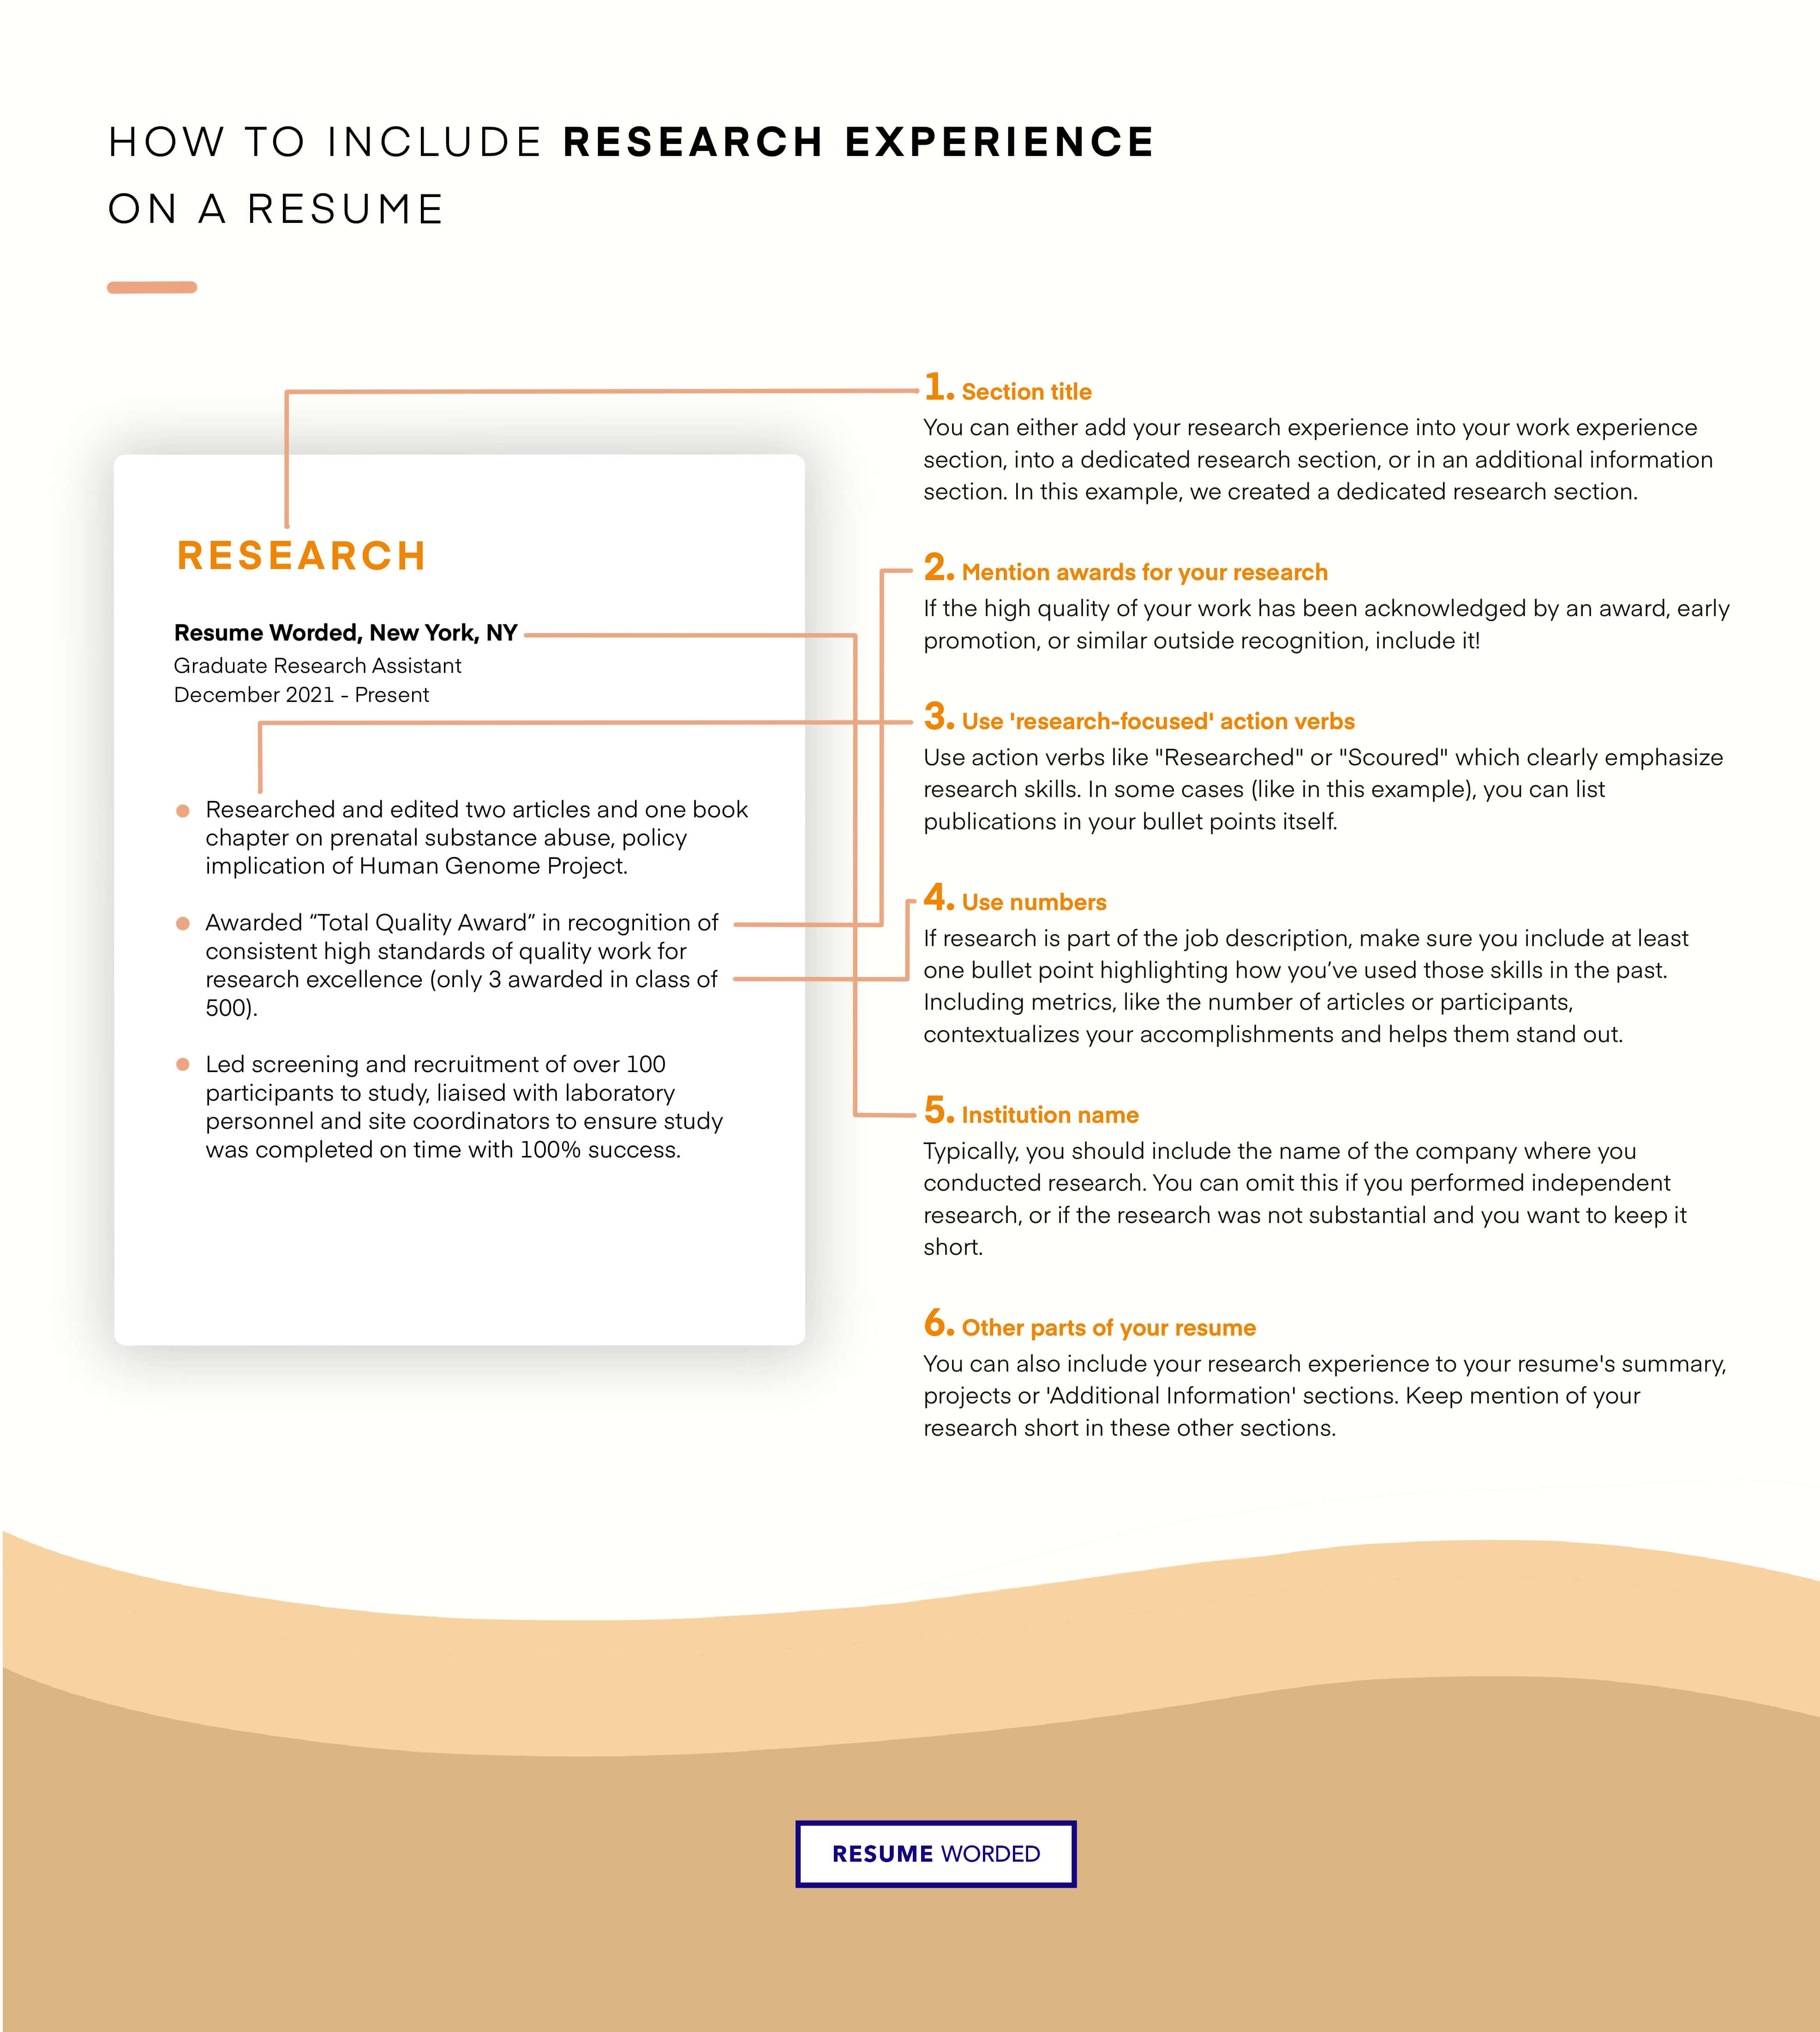 Highlights university research projects - Graduate Research Assistant Resume